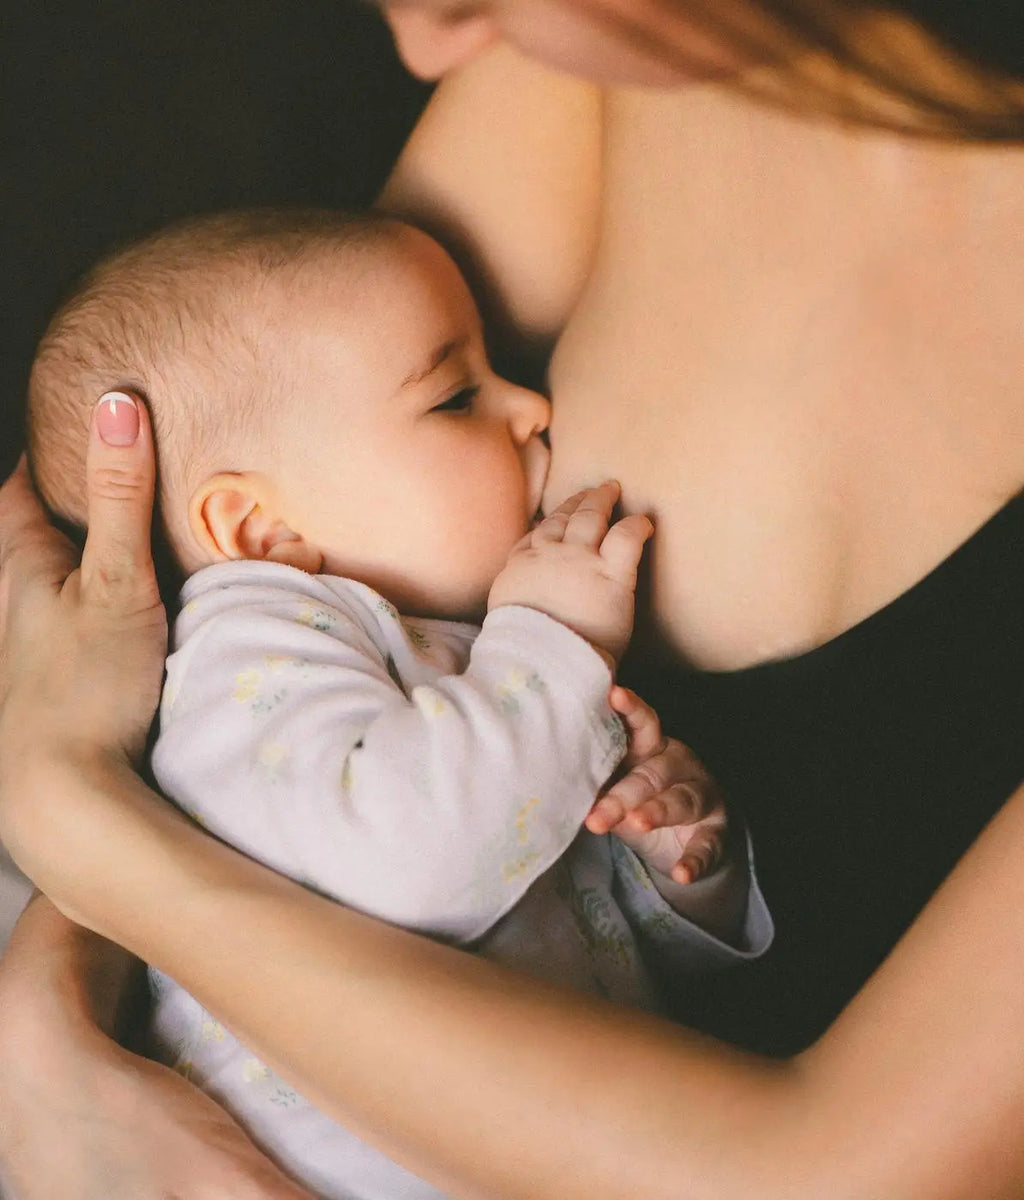 21 Must Haves For Breastfeeding For New Mamas - American Woman